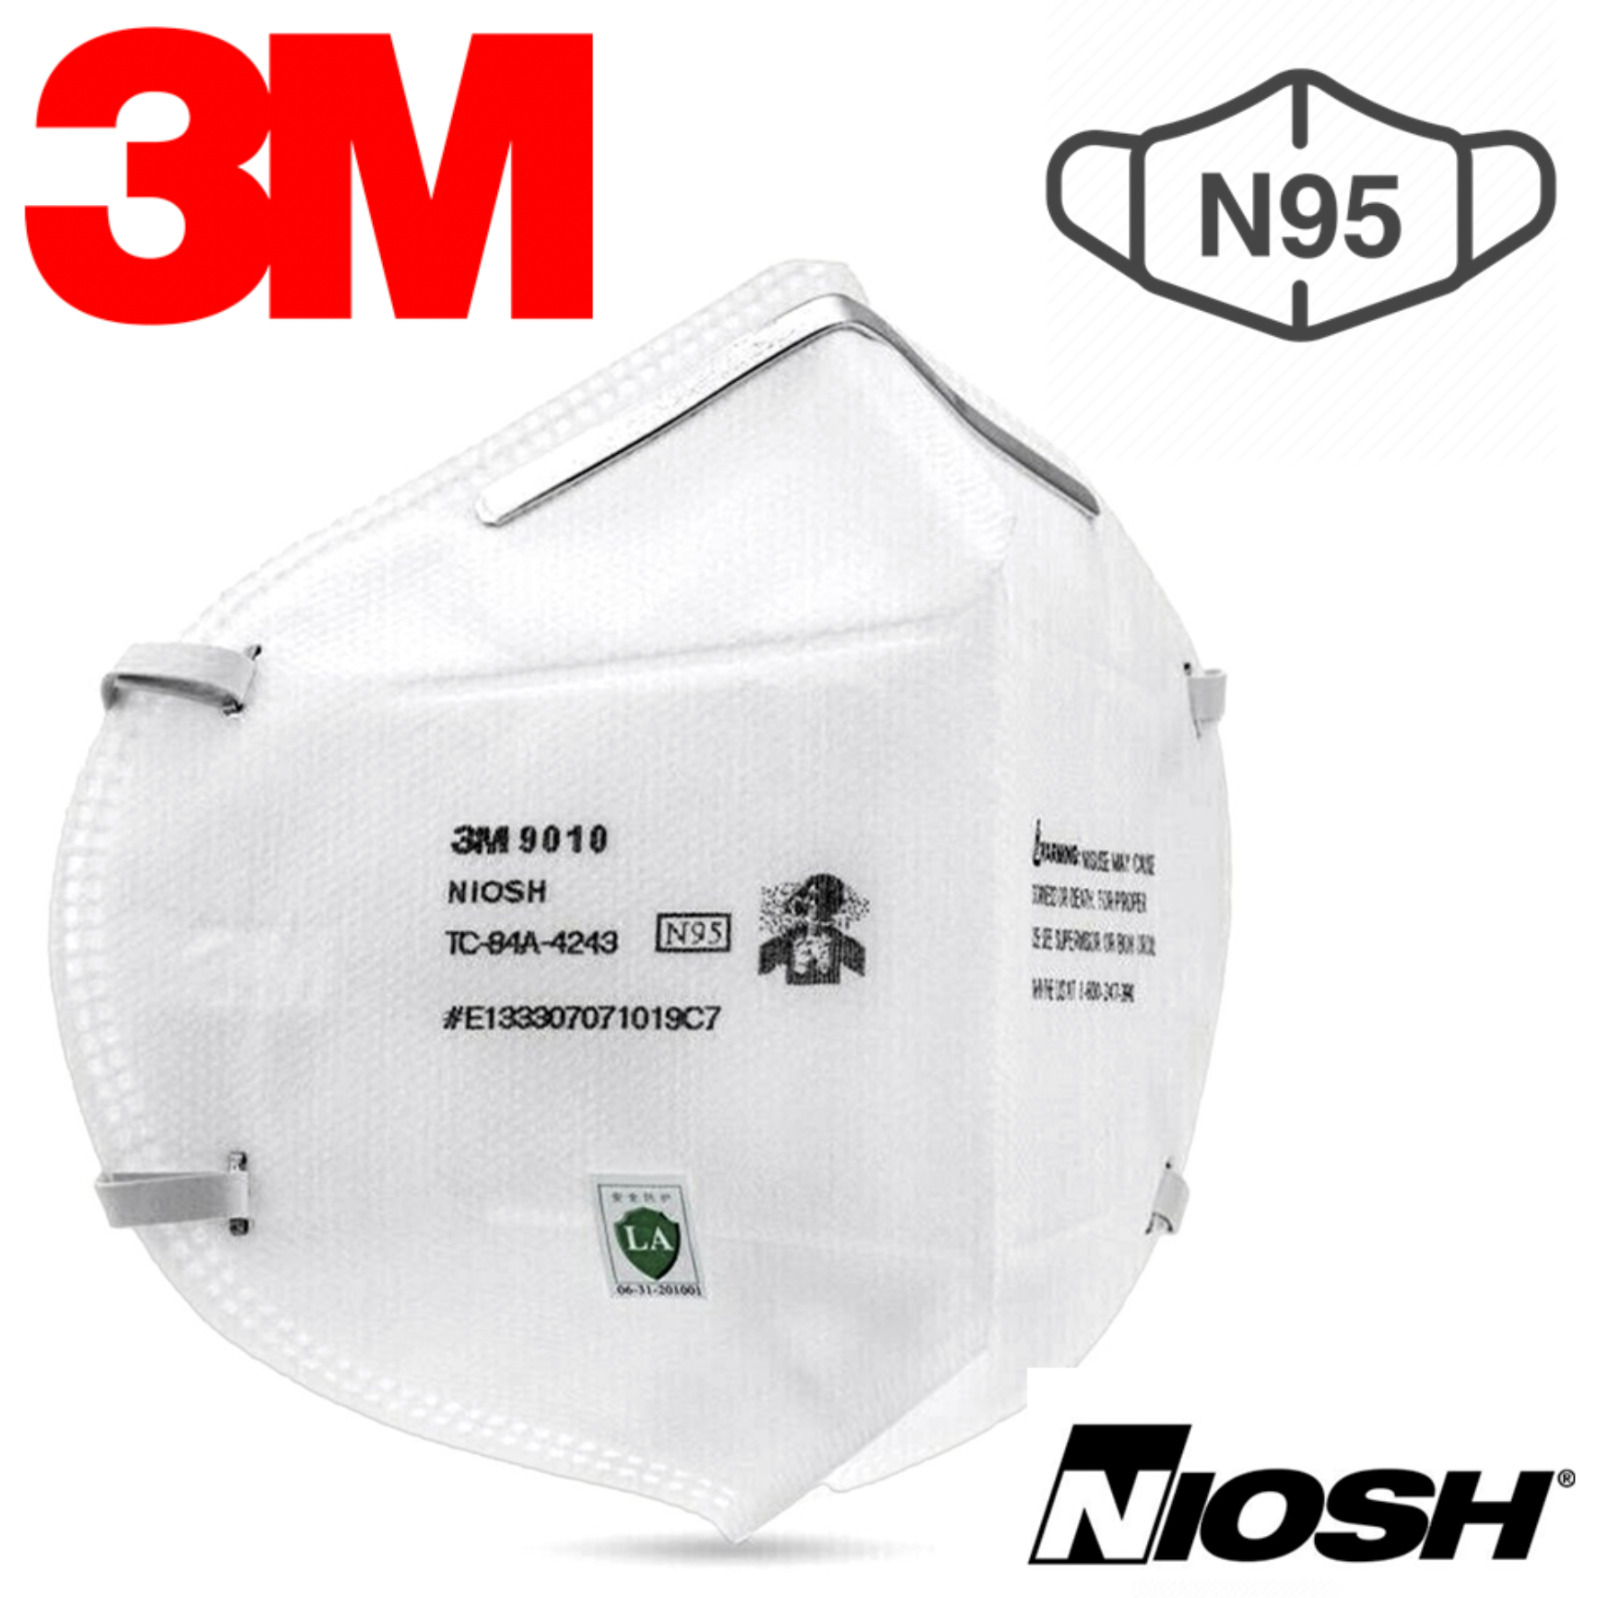 3M 9010 N95 NIOSH Protective Disposable Face Mask CDC Approved Respirator 10 pak